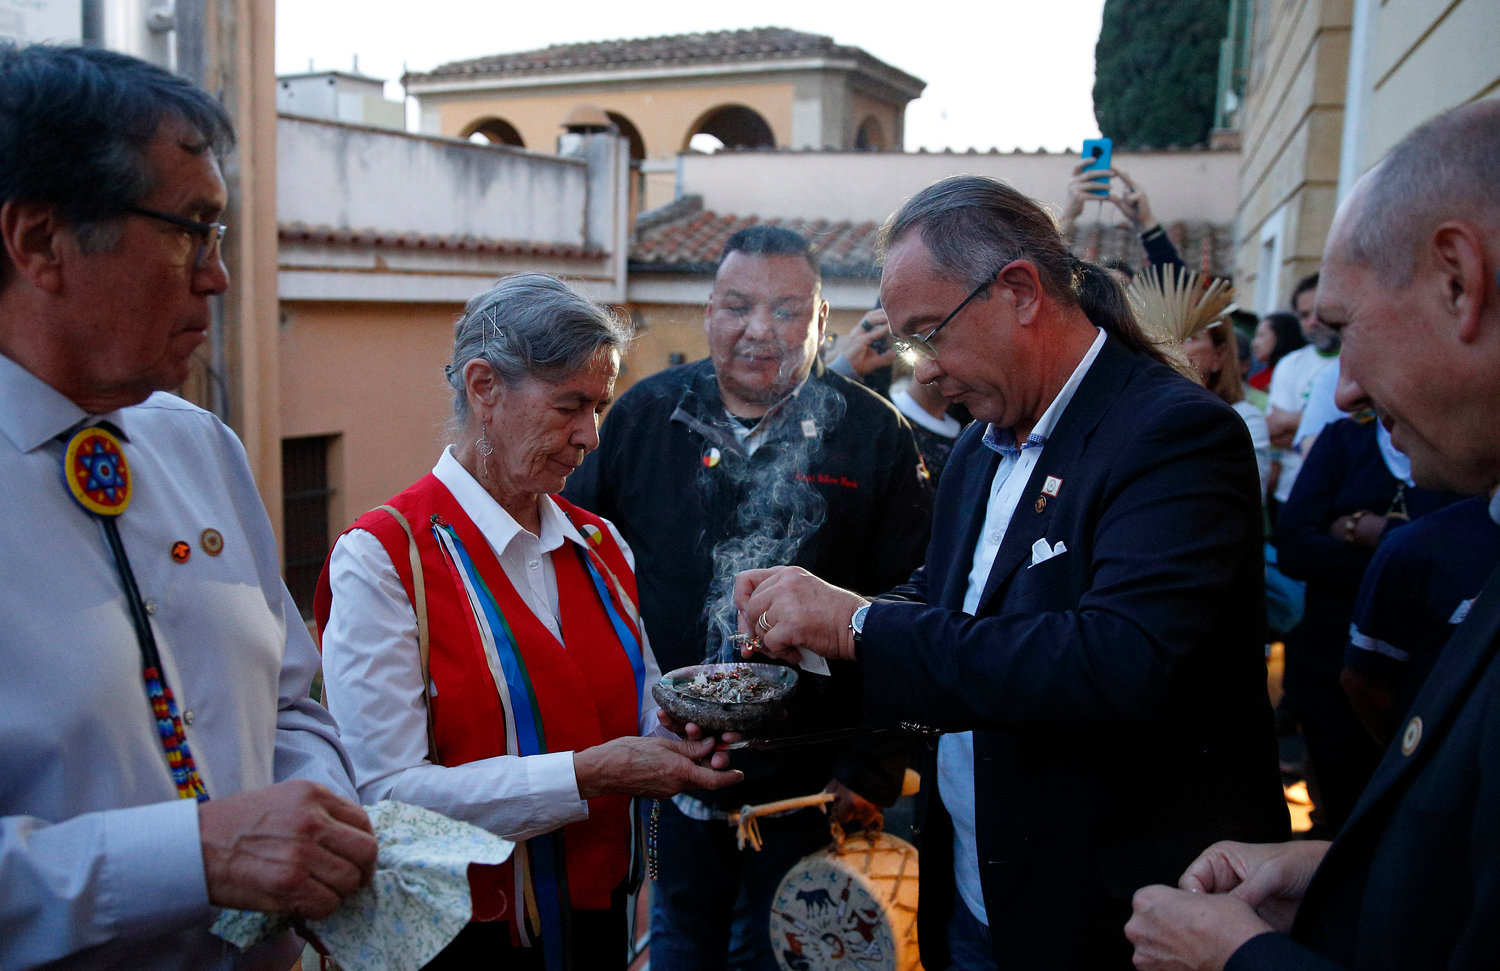 Sister Priscilla Soloman, a member of the Ojibway people and of the Sisters of St. Joseph of Sault Ste. Marie in Ontario, Canada, and Alessandro Martire, a lawyer for the Lakota Sioux, participate in an indigenous prayer at the Jesuit General Curia in Rome Oct. 17, 2019. Both participated in a meeting of indigenous peoples from North America and South America that was a side event to the Synod of Bishops for the Amazon.